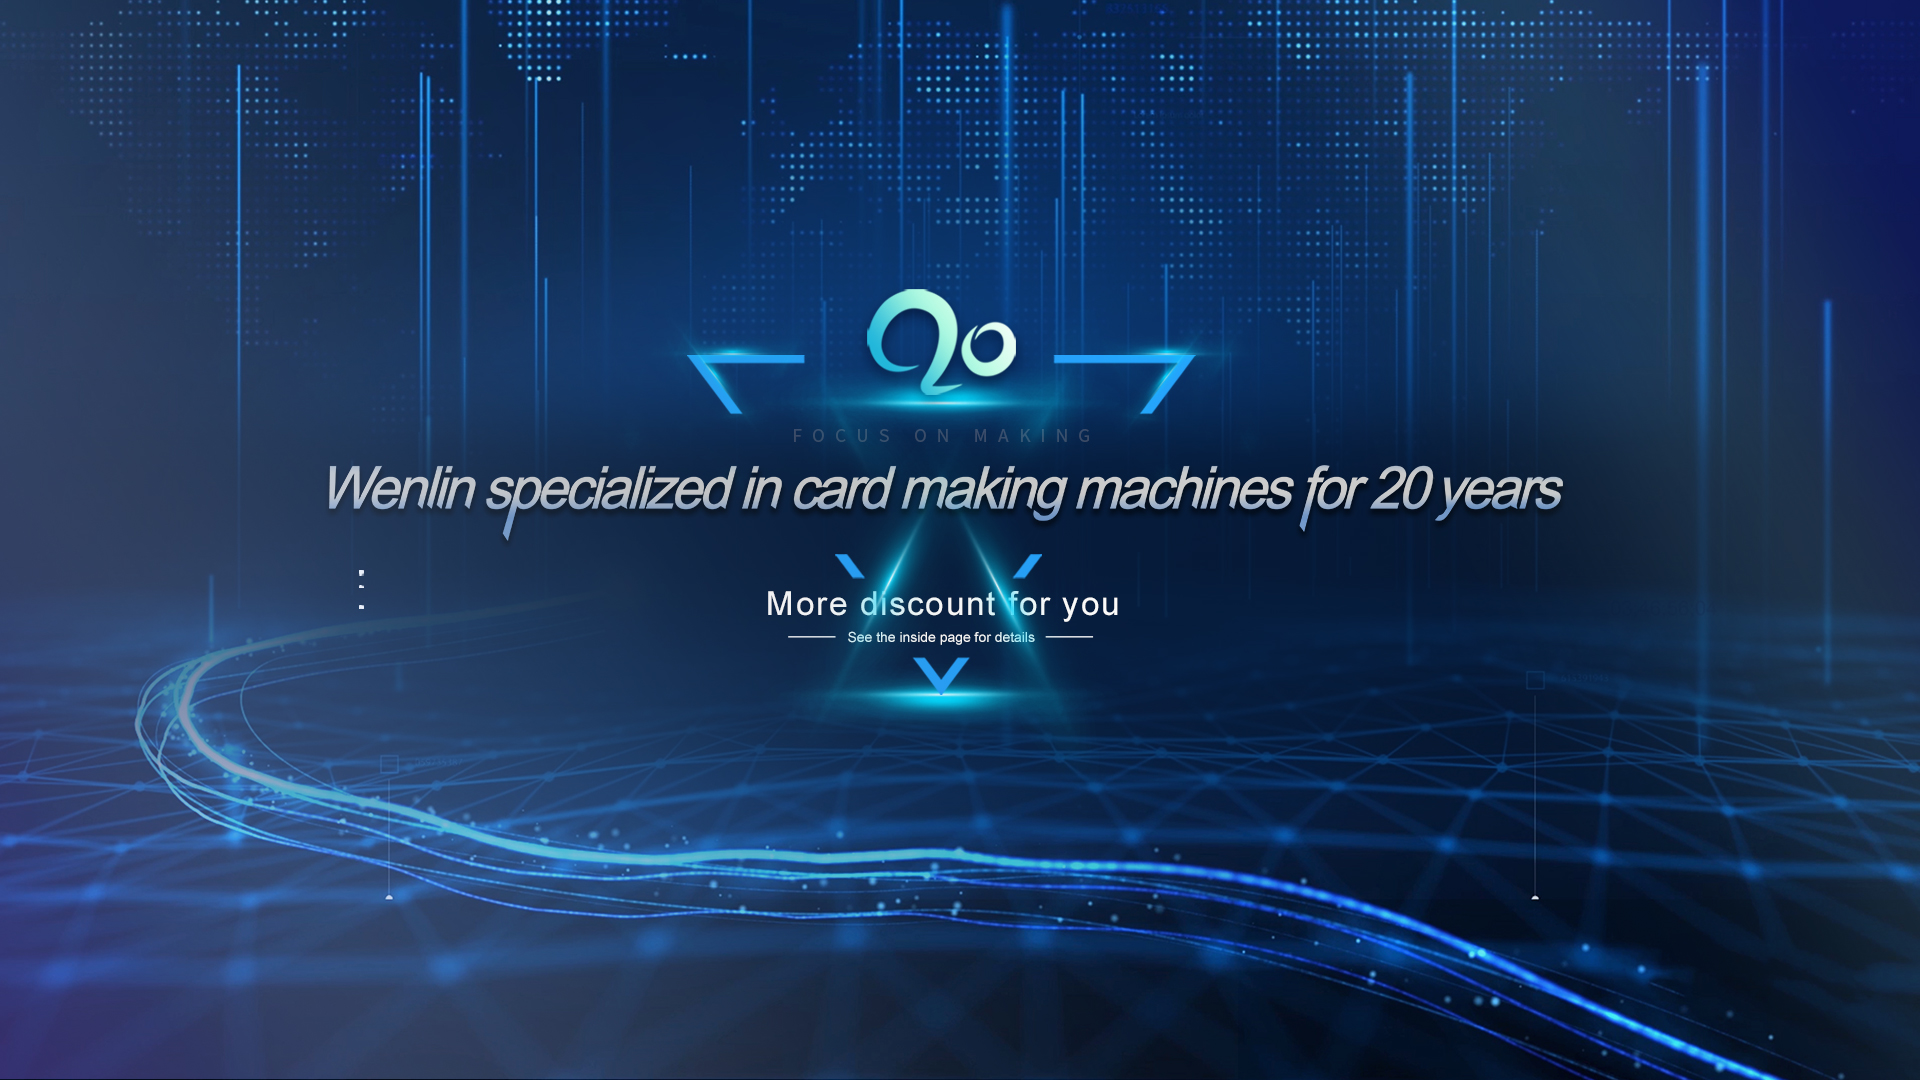 Wenlin specialized in card making machines for 20 years